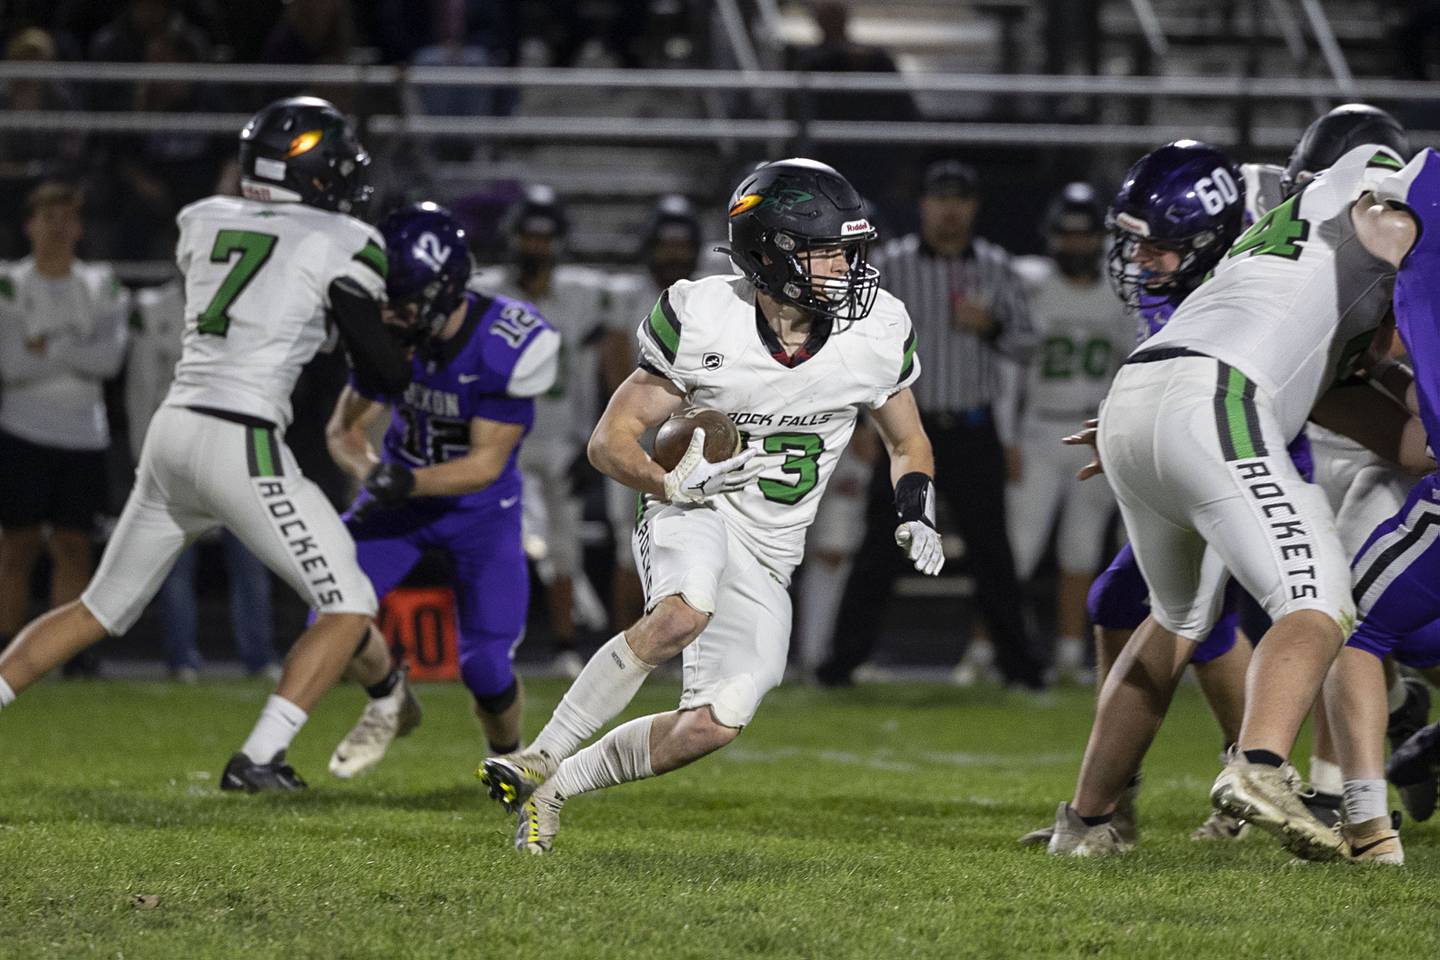 Rock Falls’ Brady Dowd picks up yards in the first quarter Friday, Oct. 21, 2022 against Dixon.